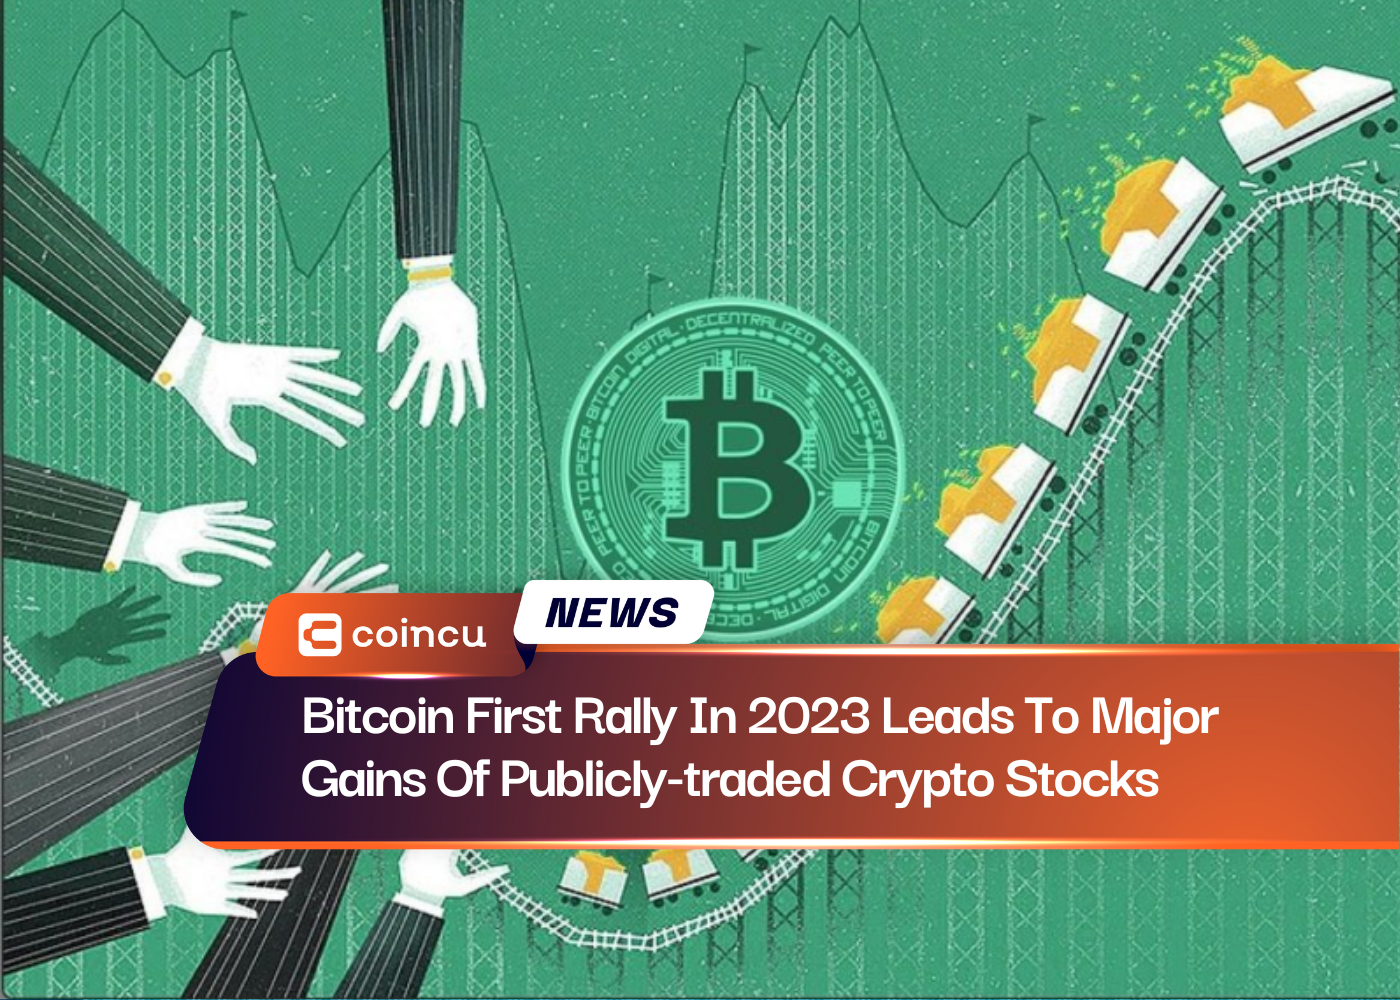 Bitcoin First Rally In 2023 Leads To Major Gains Of Publicly-traded Crypto Stocks